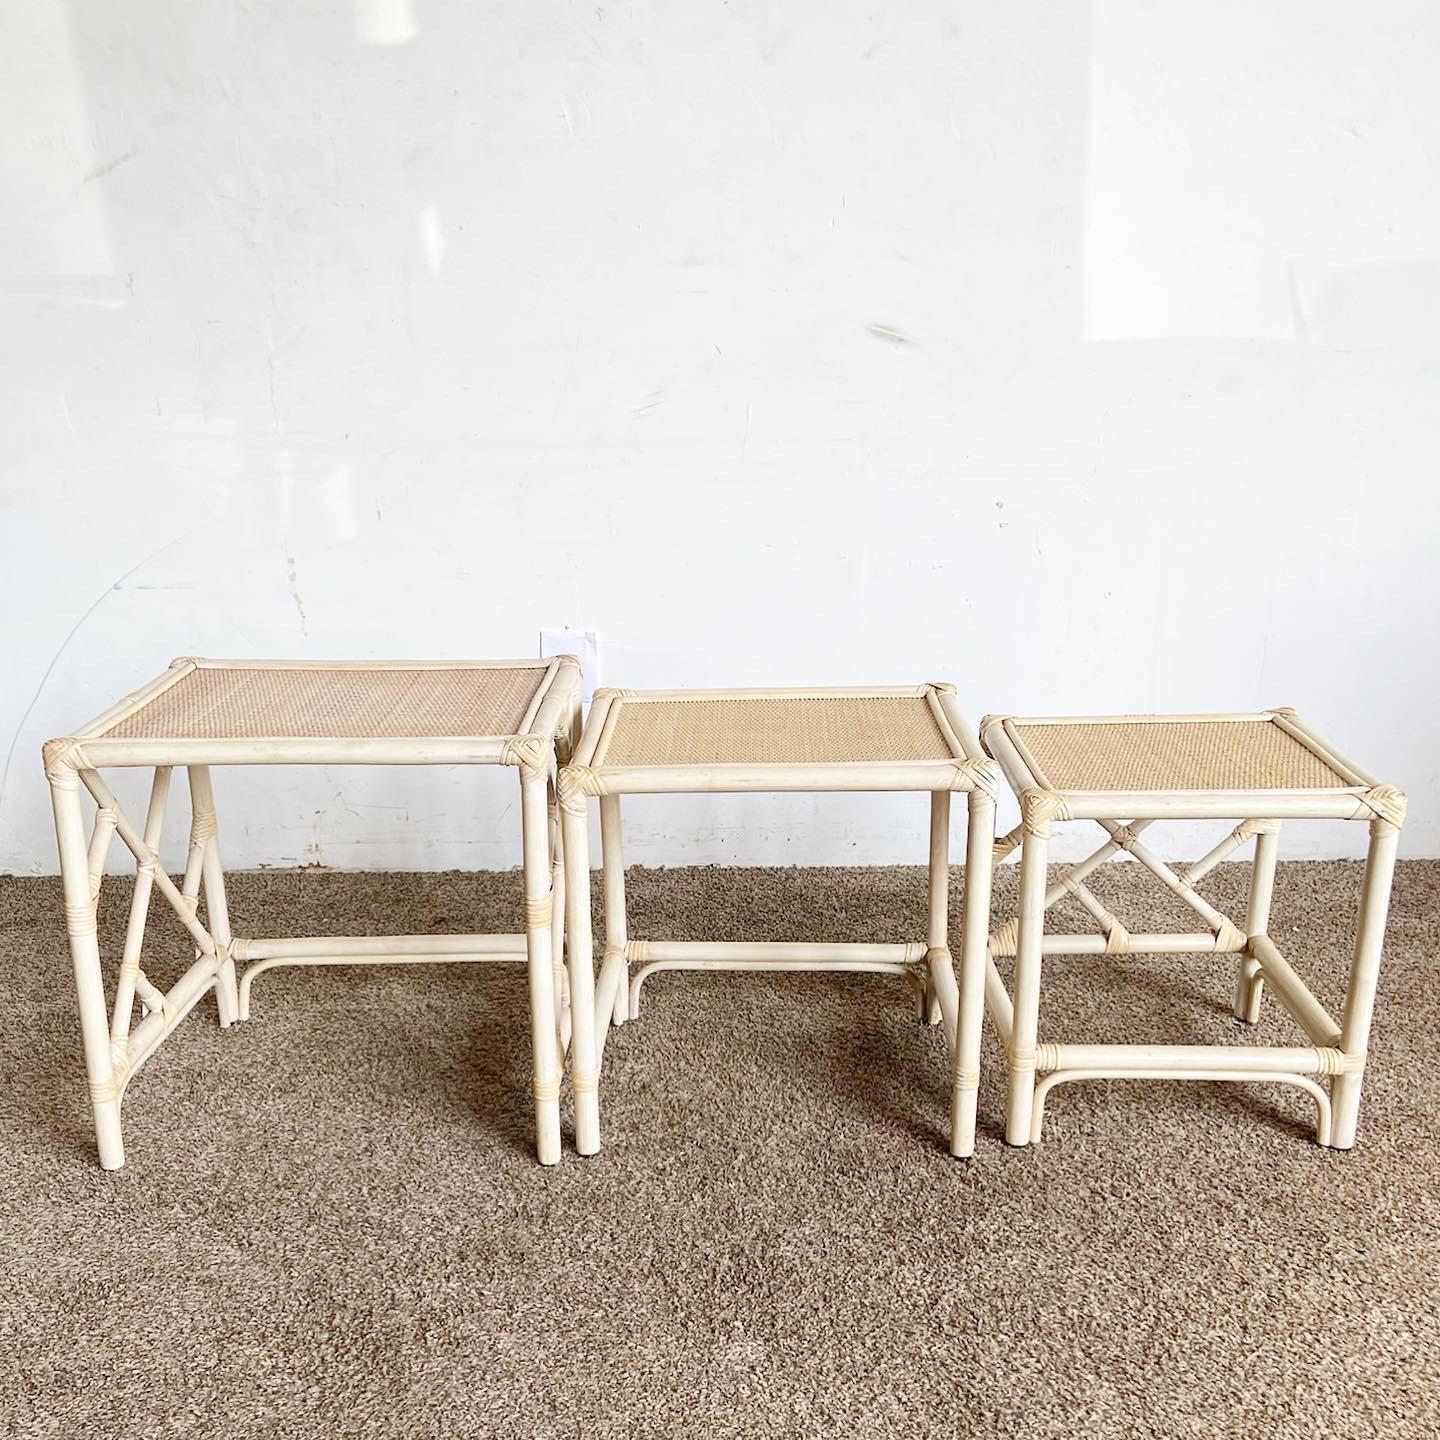 Boho Chic Bamboo Rattan Chippendale Style Nesting Tables - Set of 3 For Sale 4